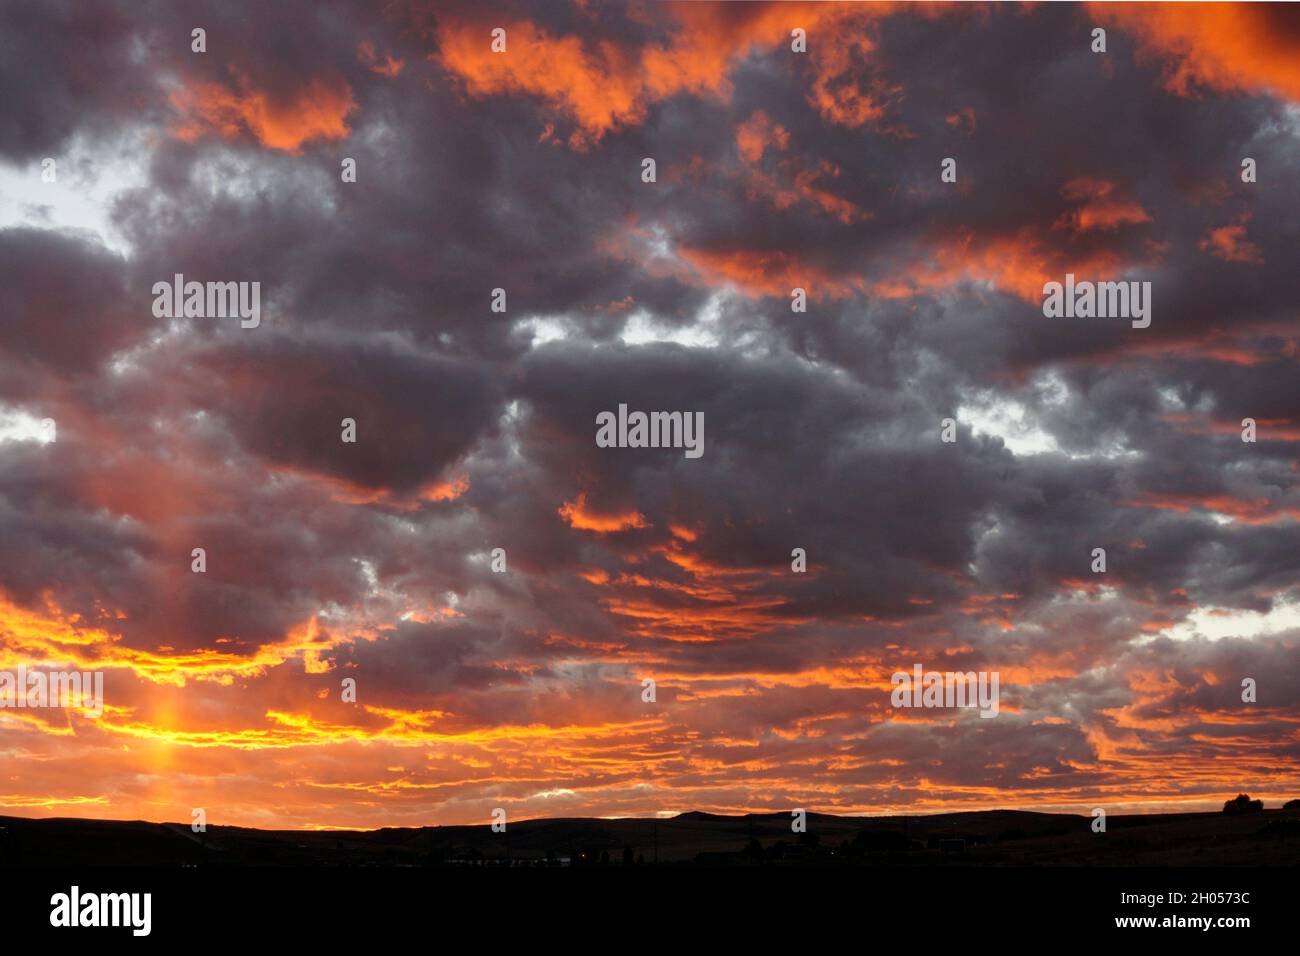 Dramatic sky with orange and purple clouds just after sunset Stock Photo